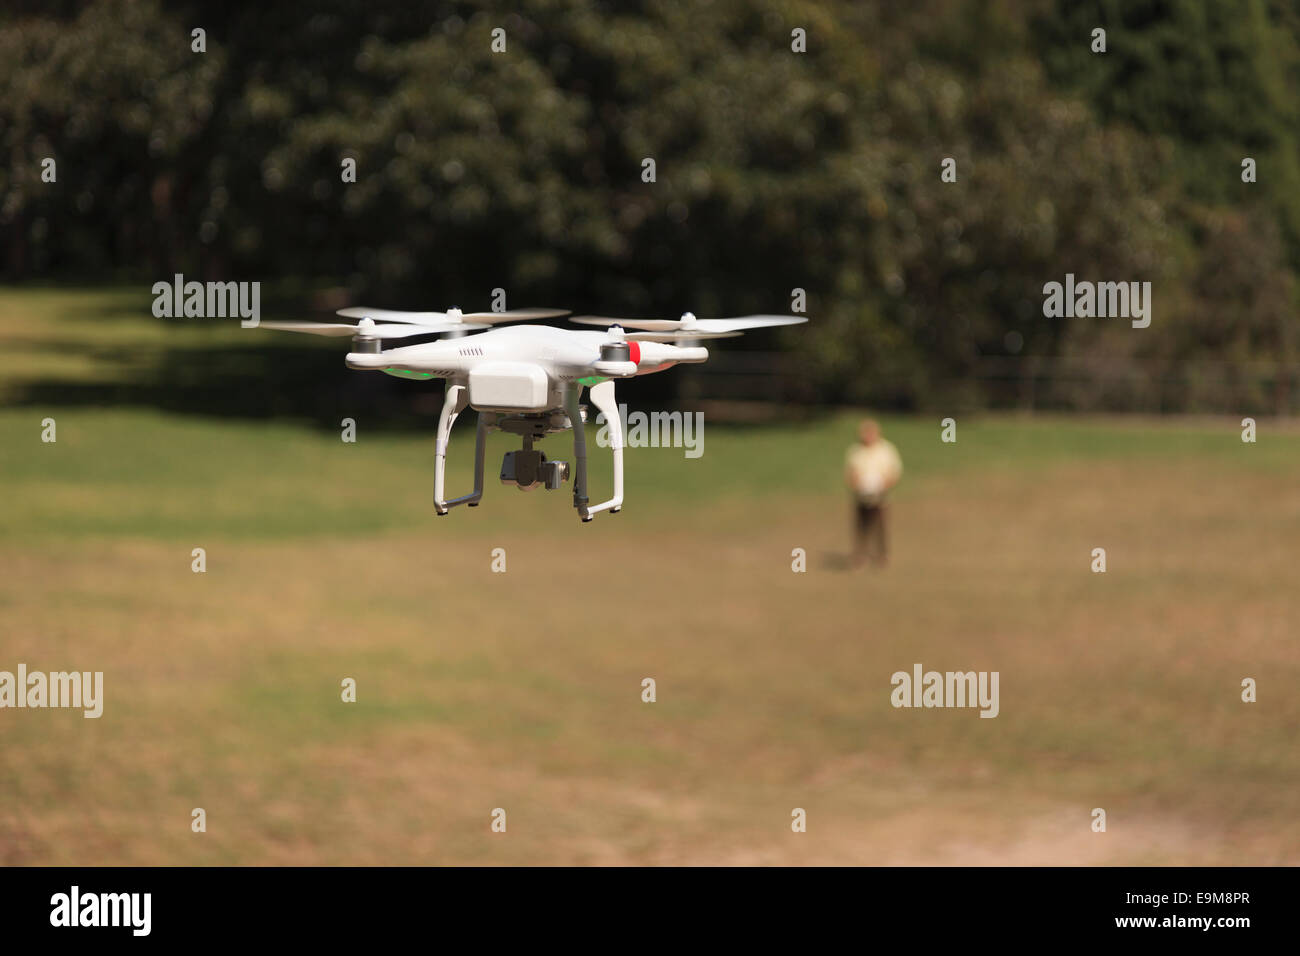 Drone Photographer with flying Drone in full view. The male Photographer is out of focus the drone sharp. Stock Photo